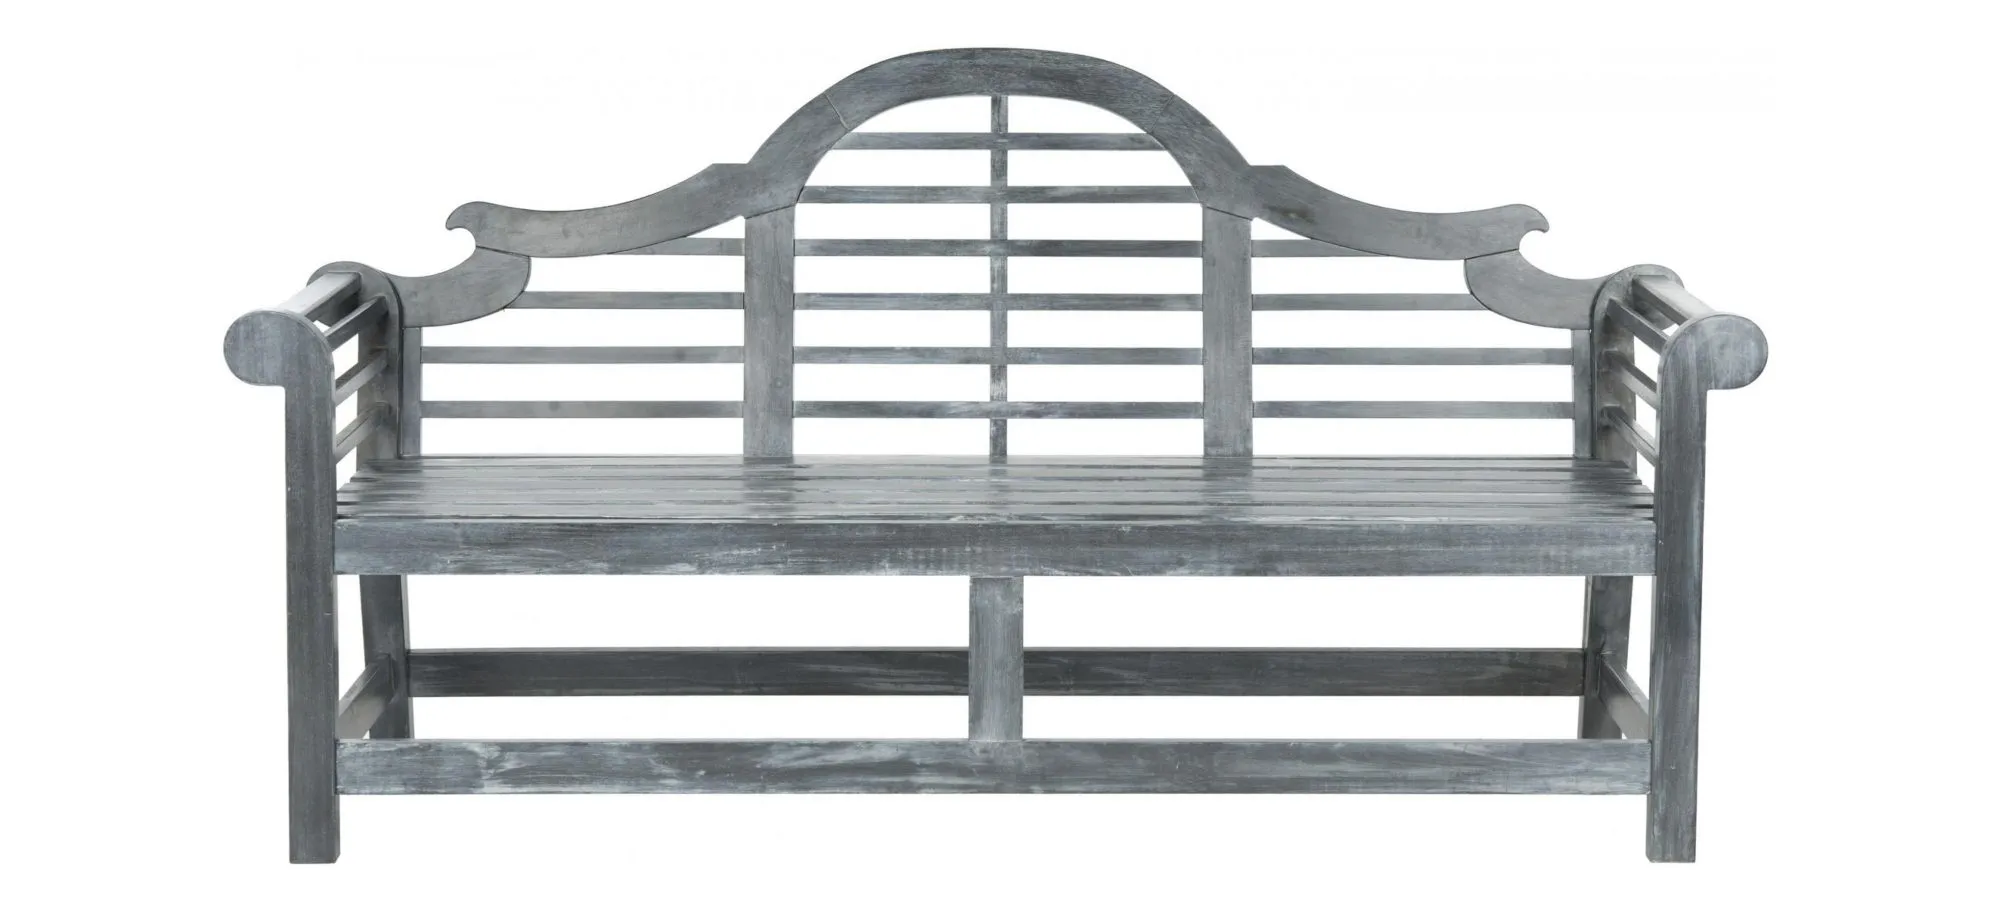 Khara Outdoor Bench in Gray by Safavieh